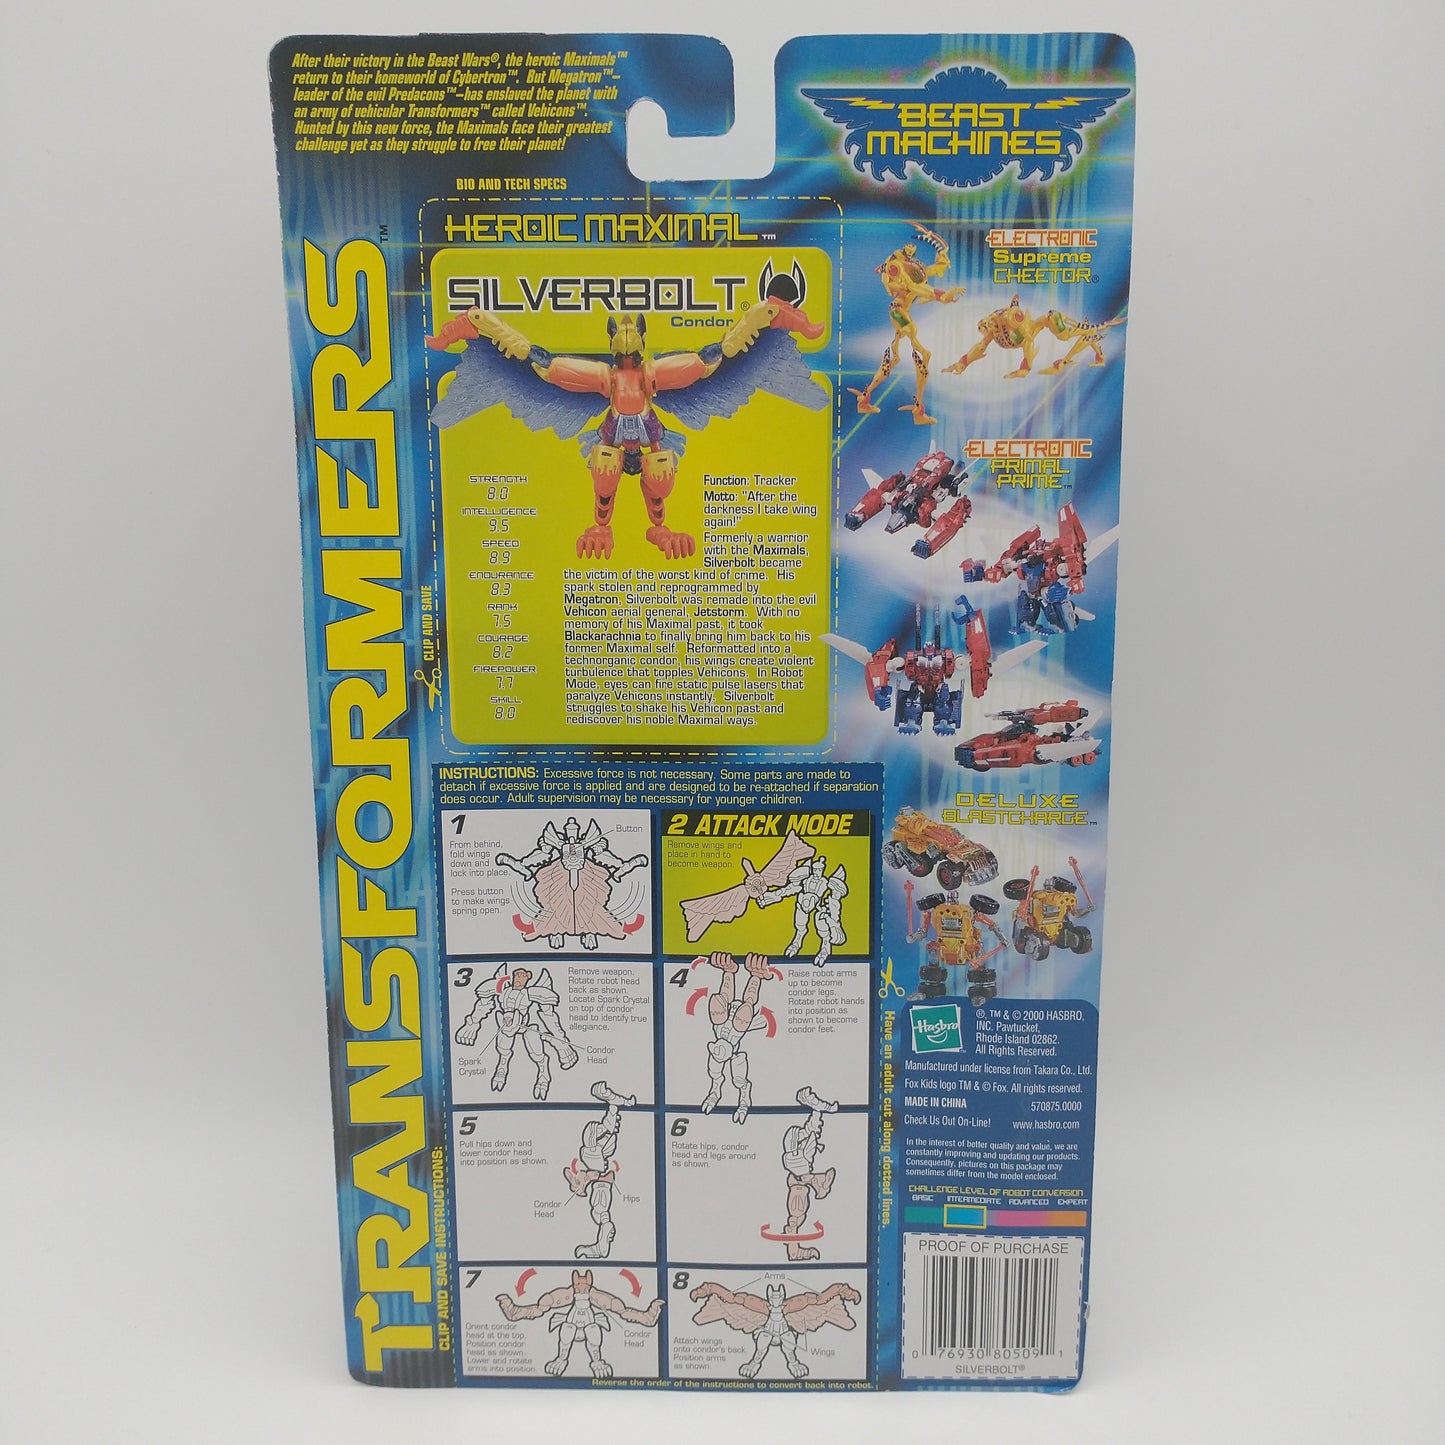 he back of the card featuring images of the action figure and a summary of information about them. It is illegible in the picture.